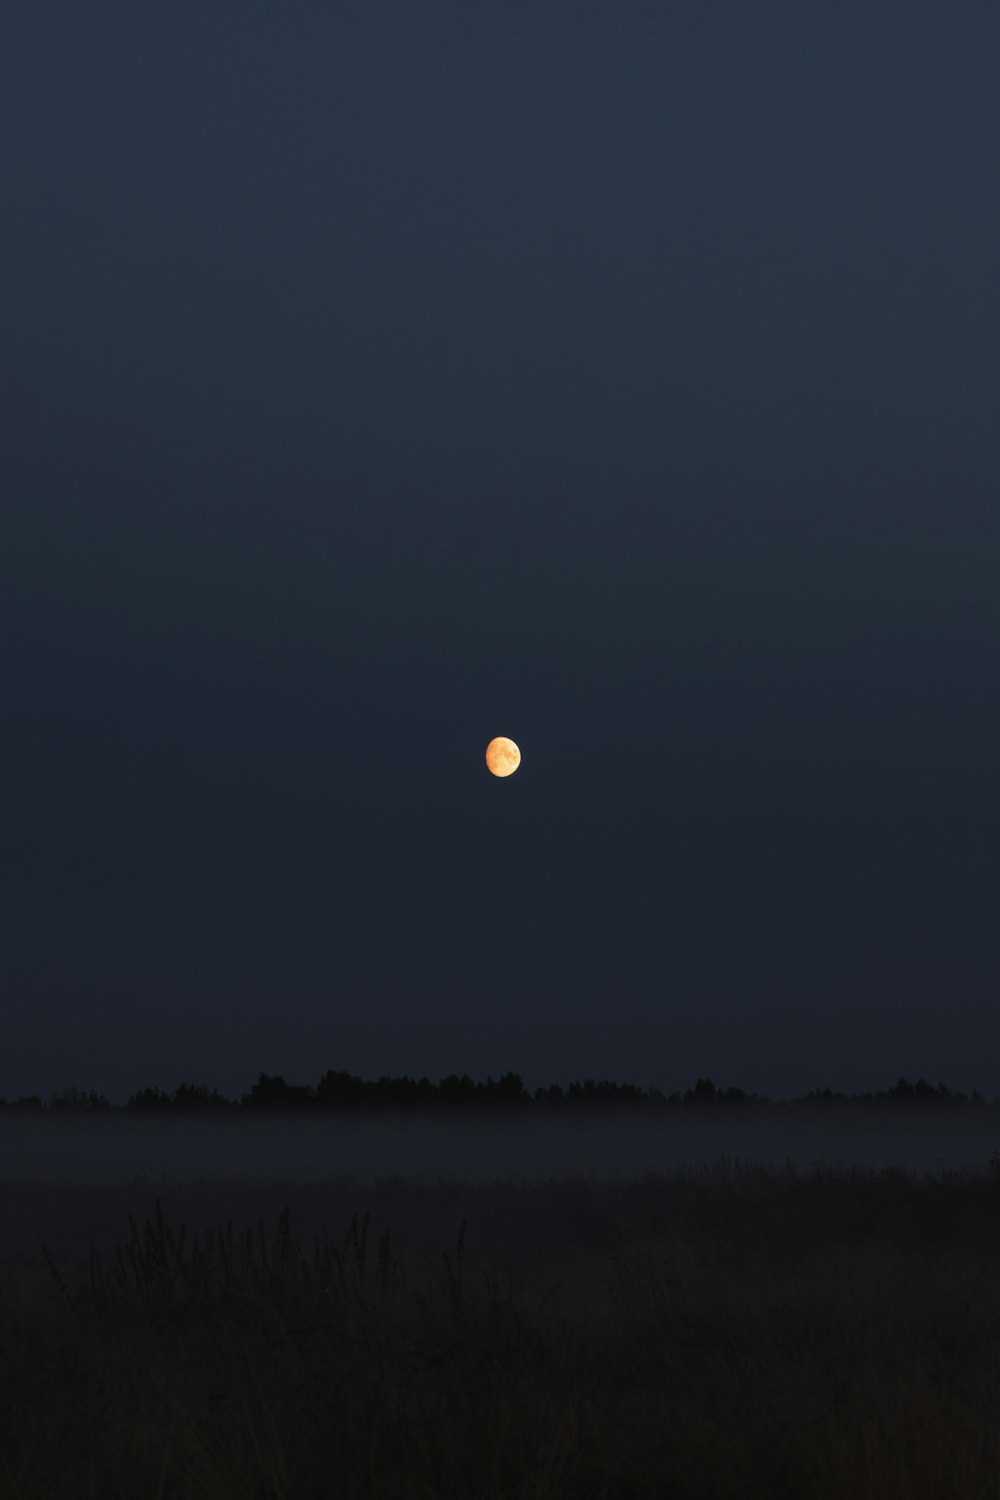 a full moon is seen in the sky over a field